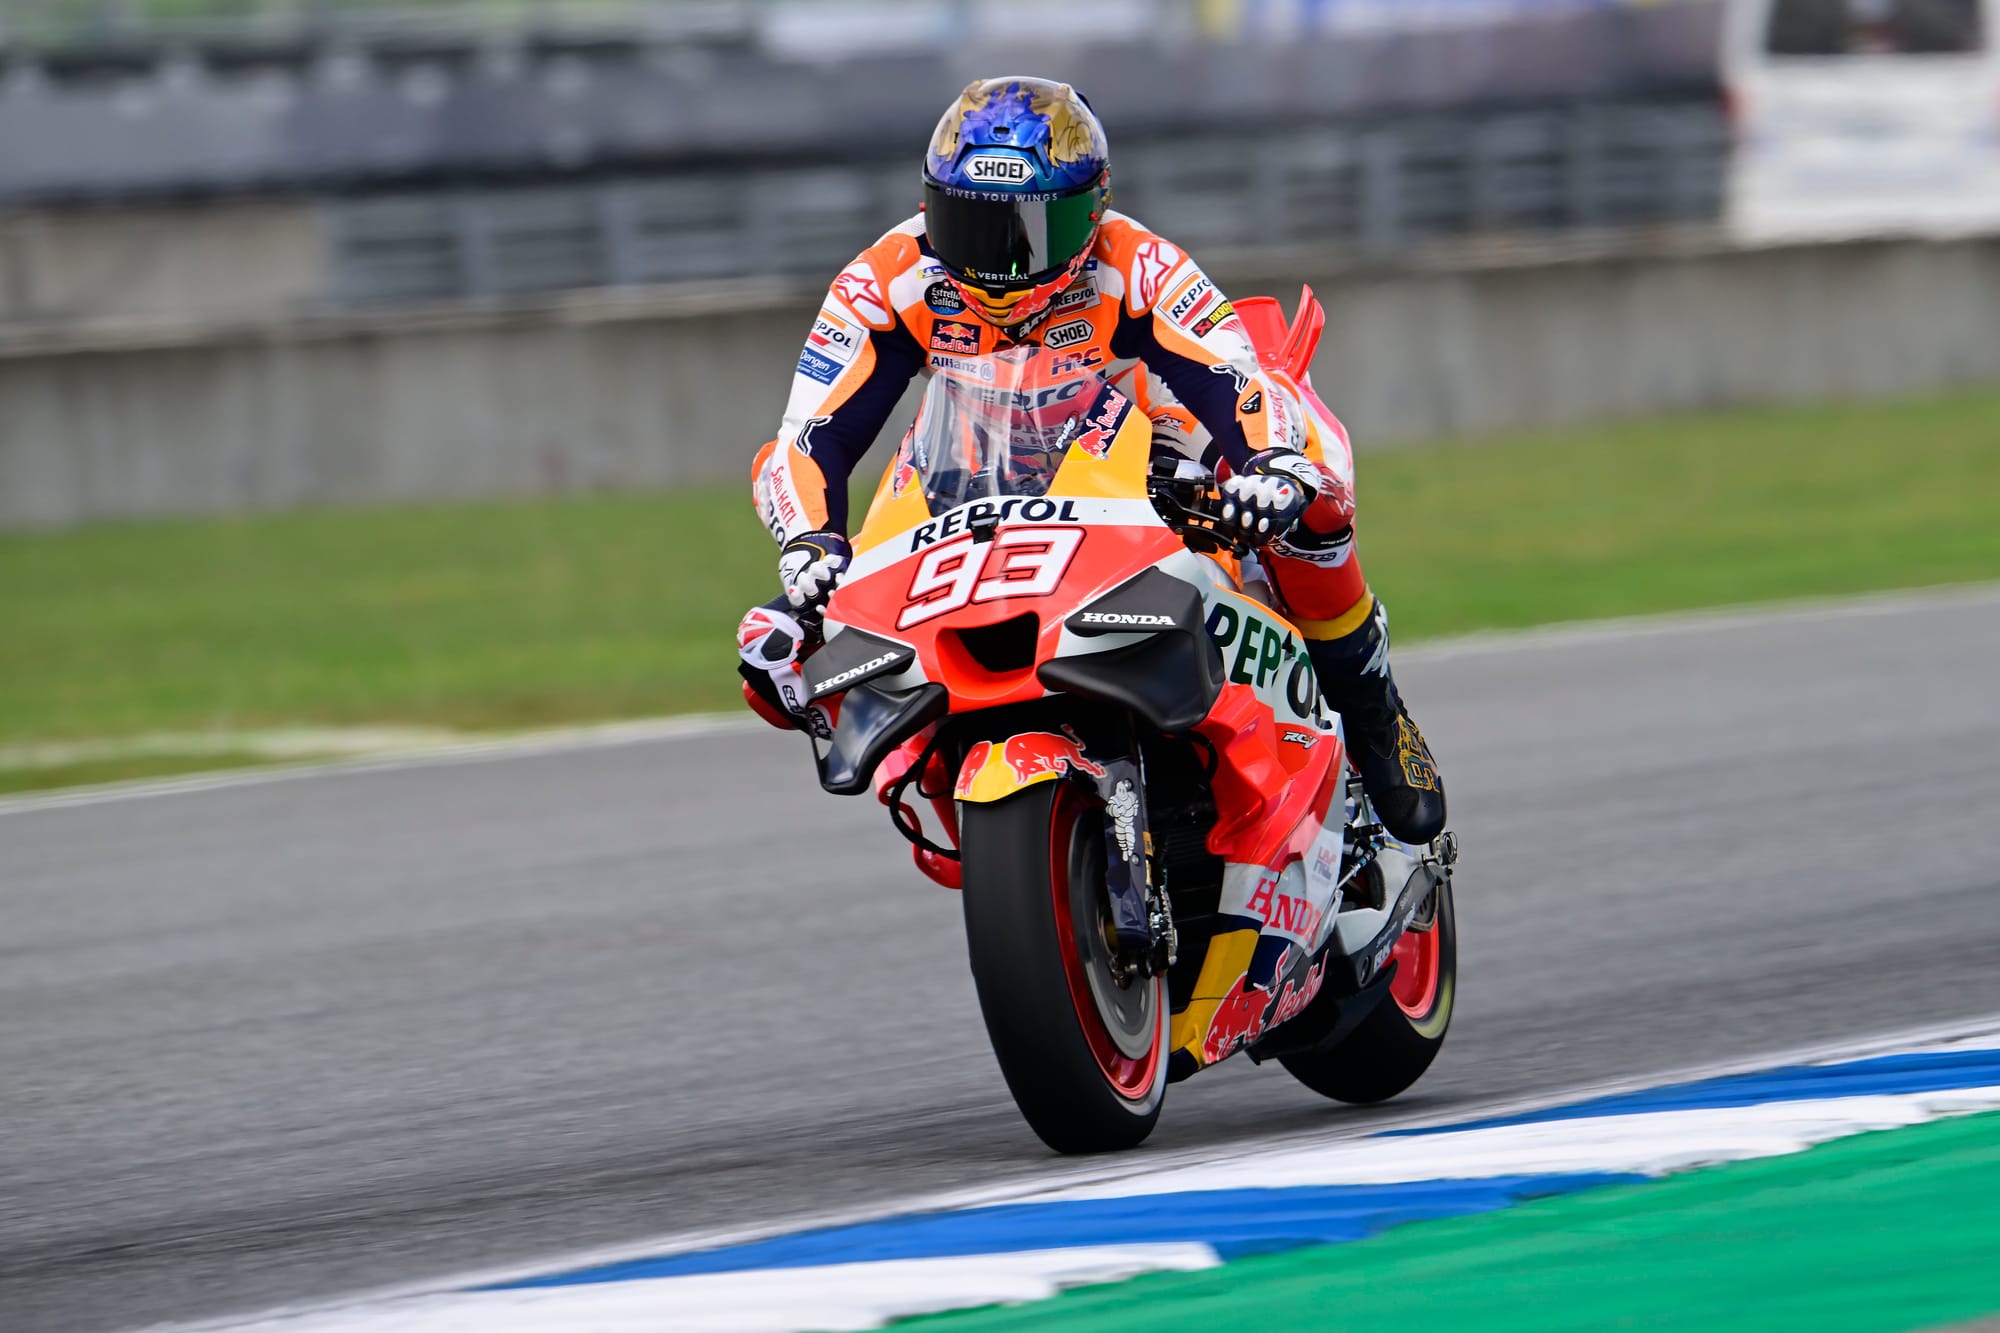 Honda MotoGP strength Marquez used to exploit now 'completely lost'